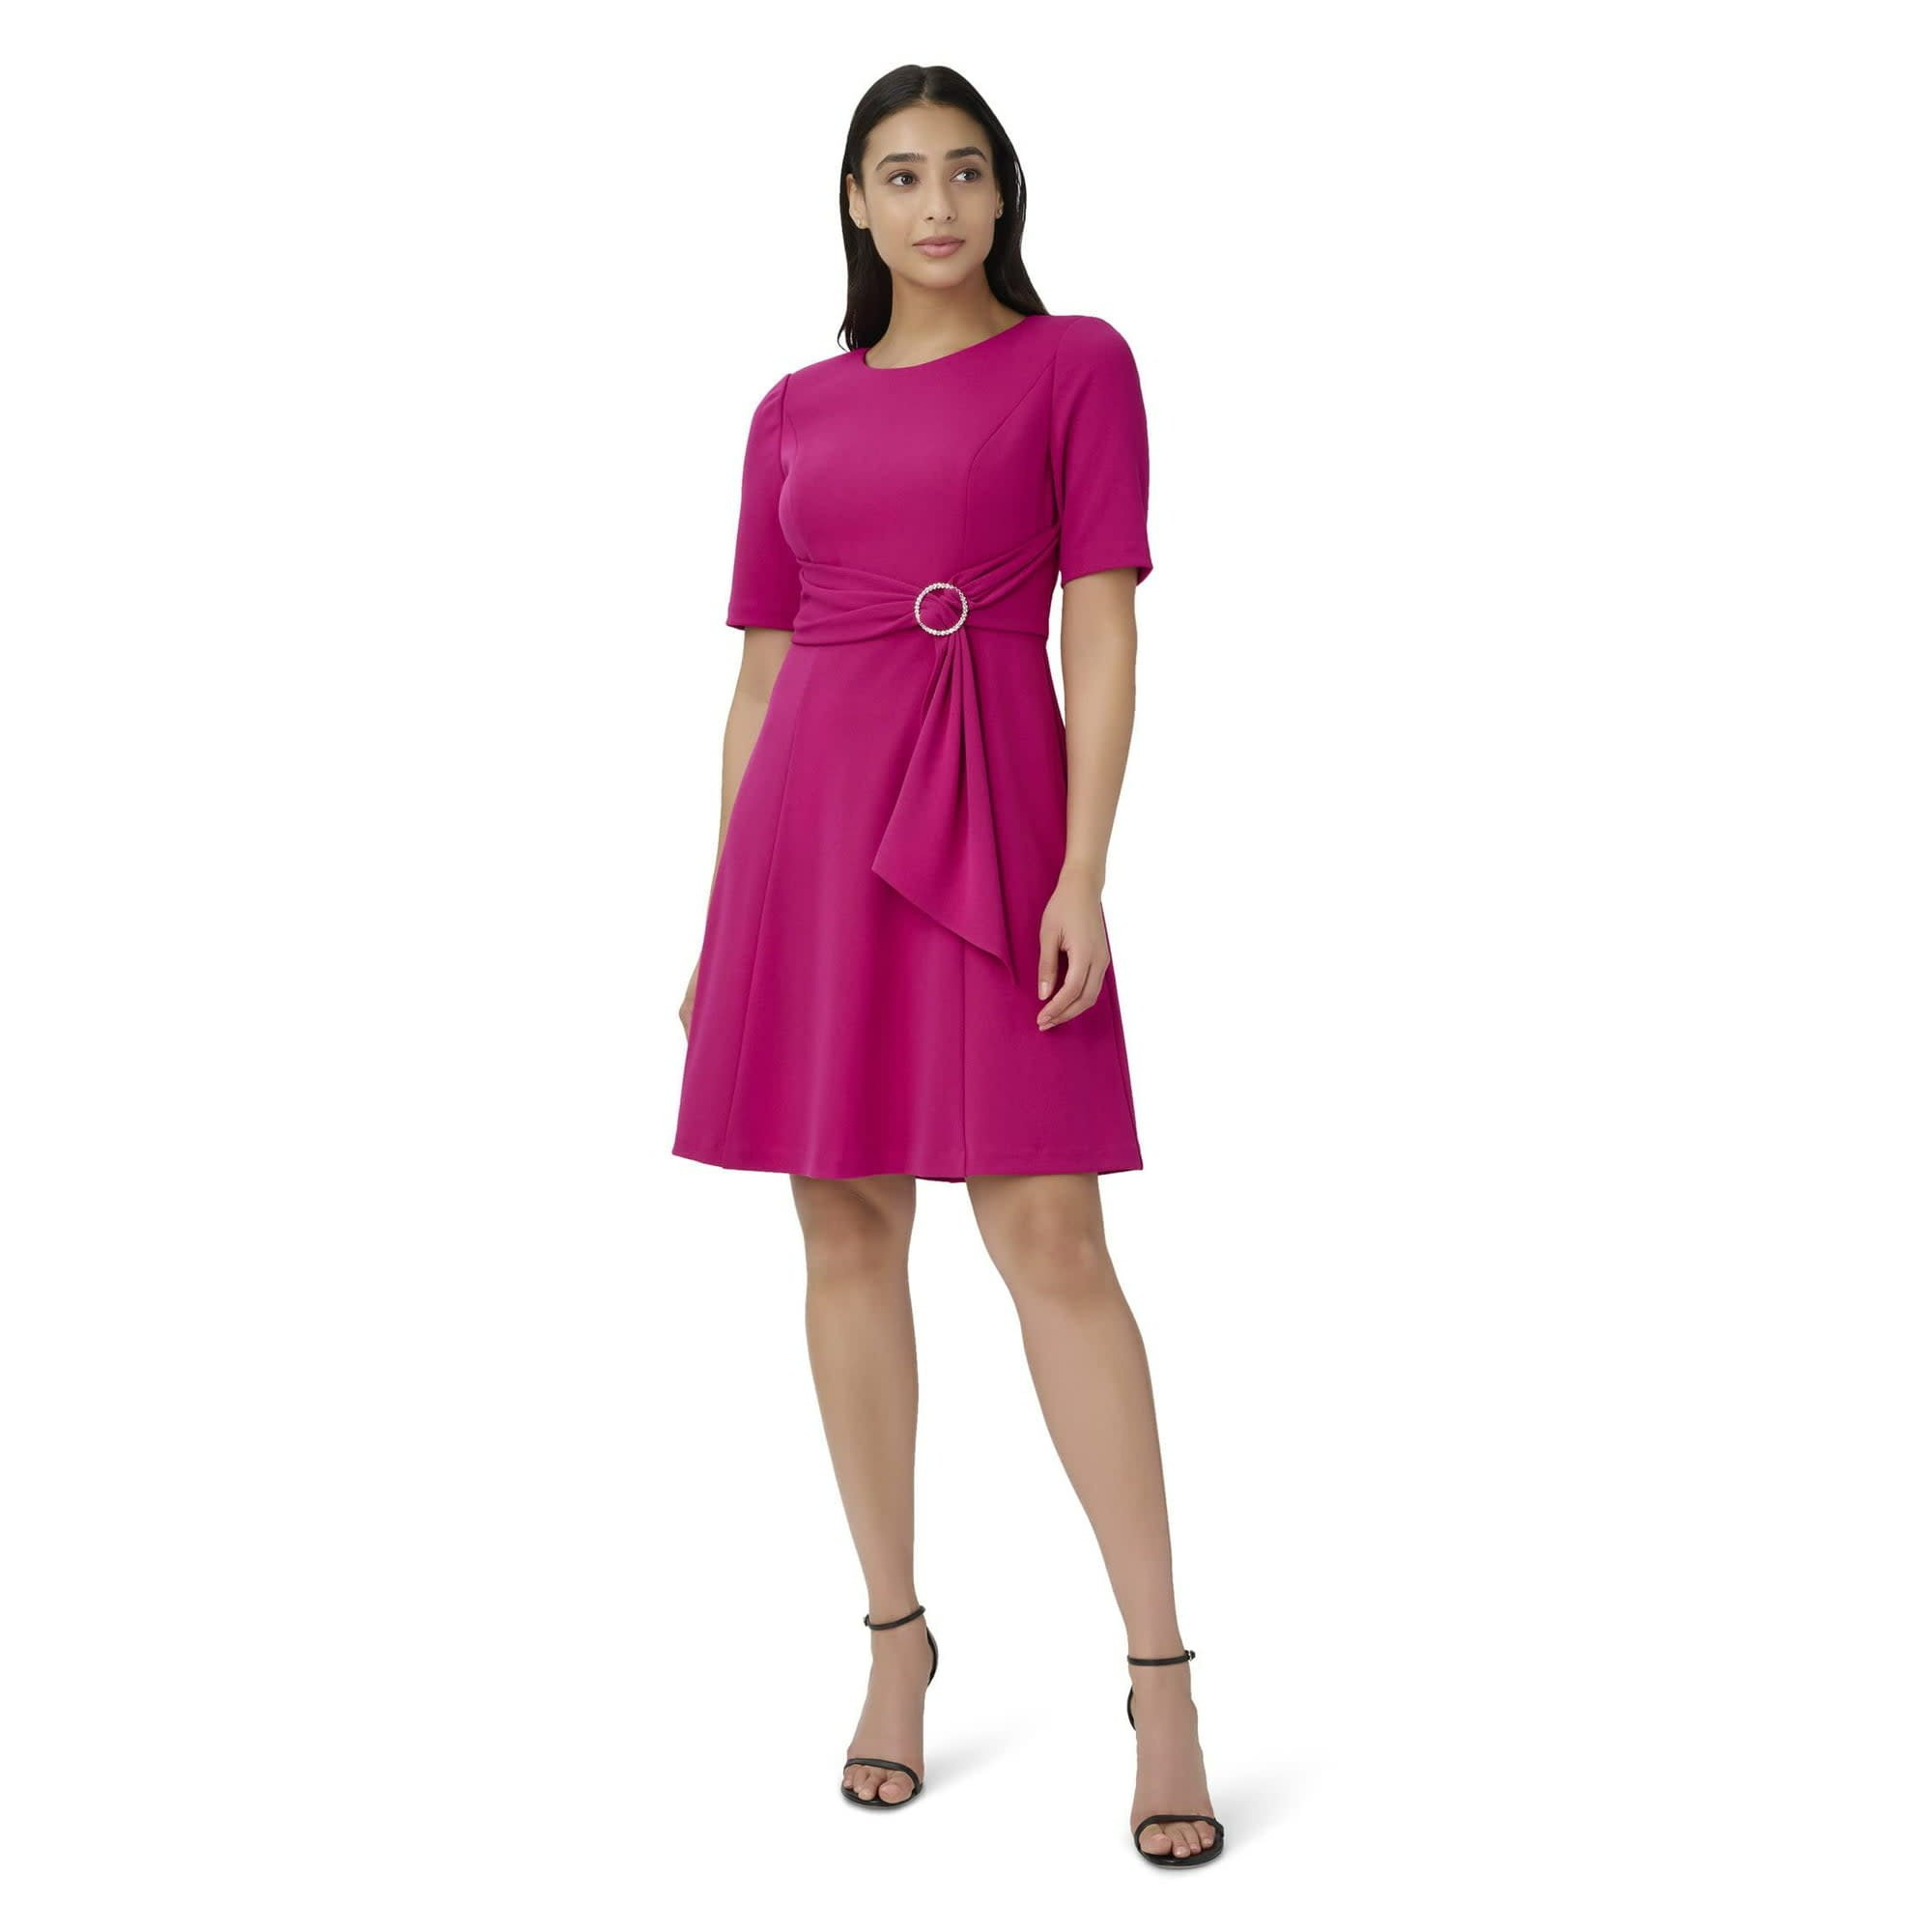 ADRIANNA PAPELL ADRIANNA PAPELL TIE FRONT FLARED DRESSES